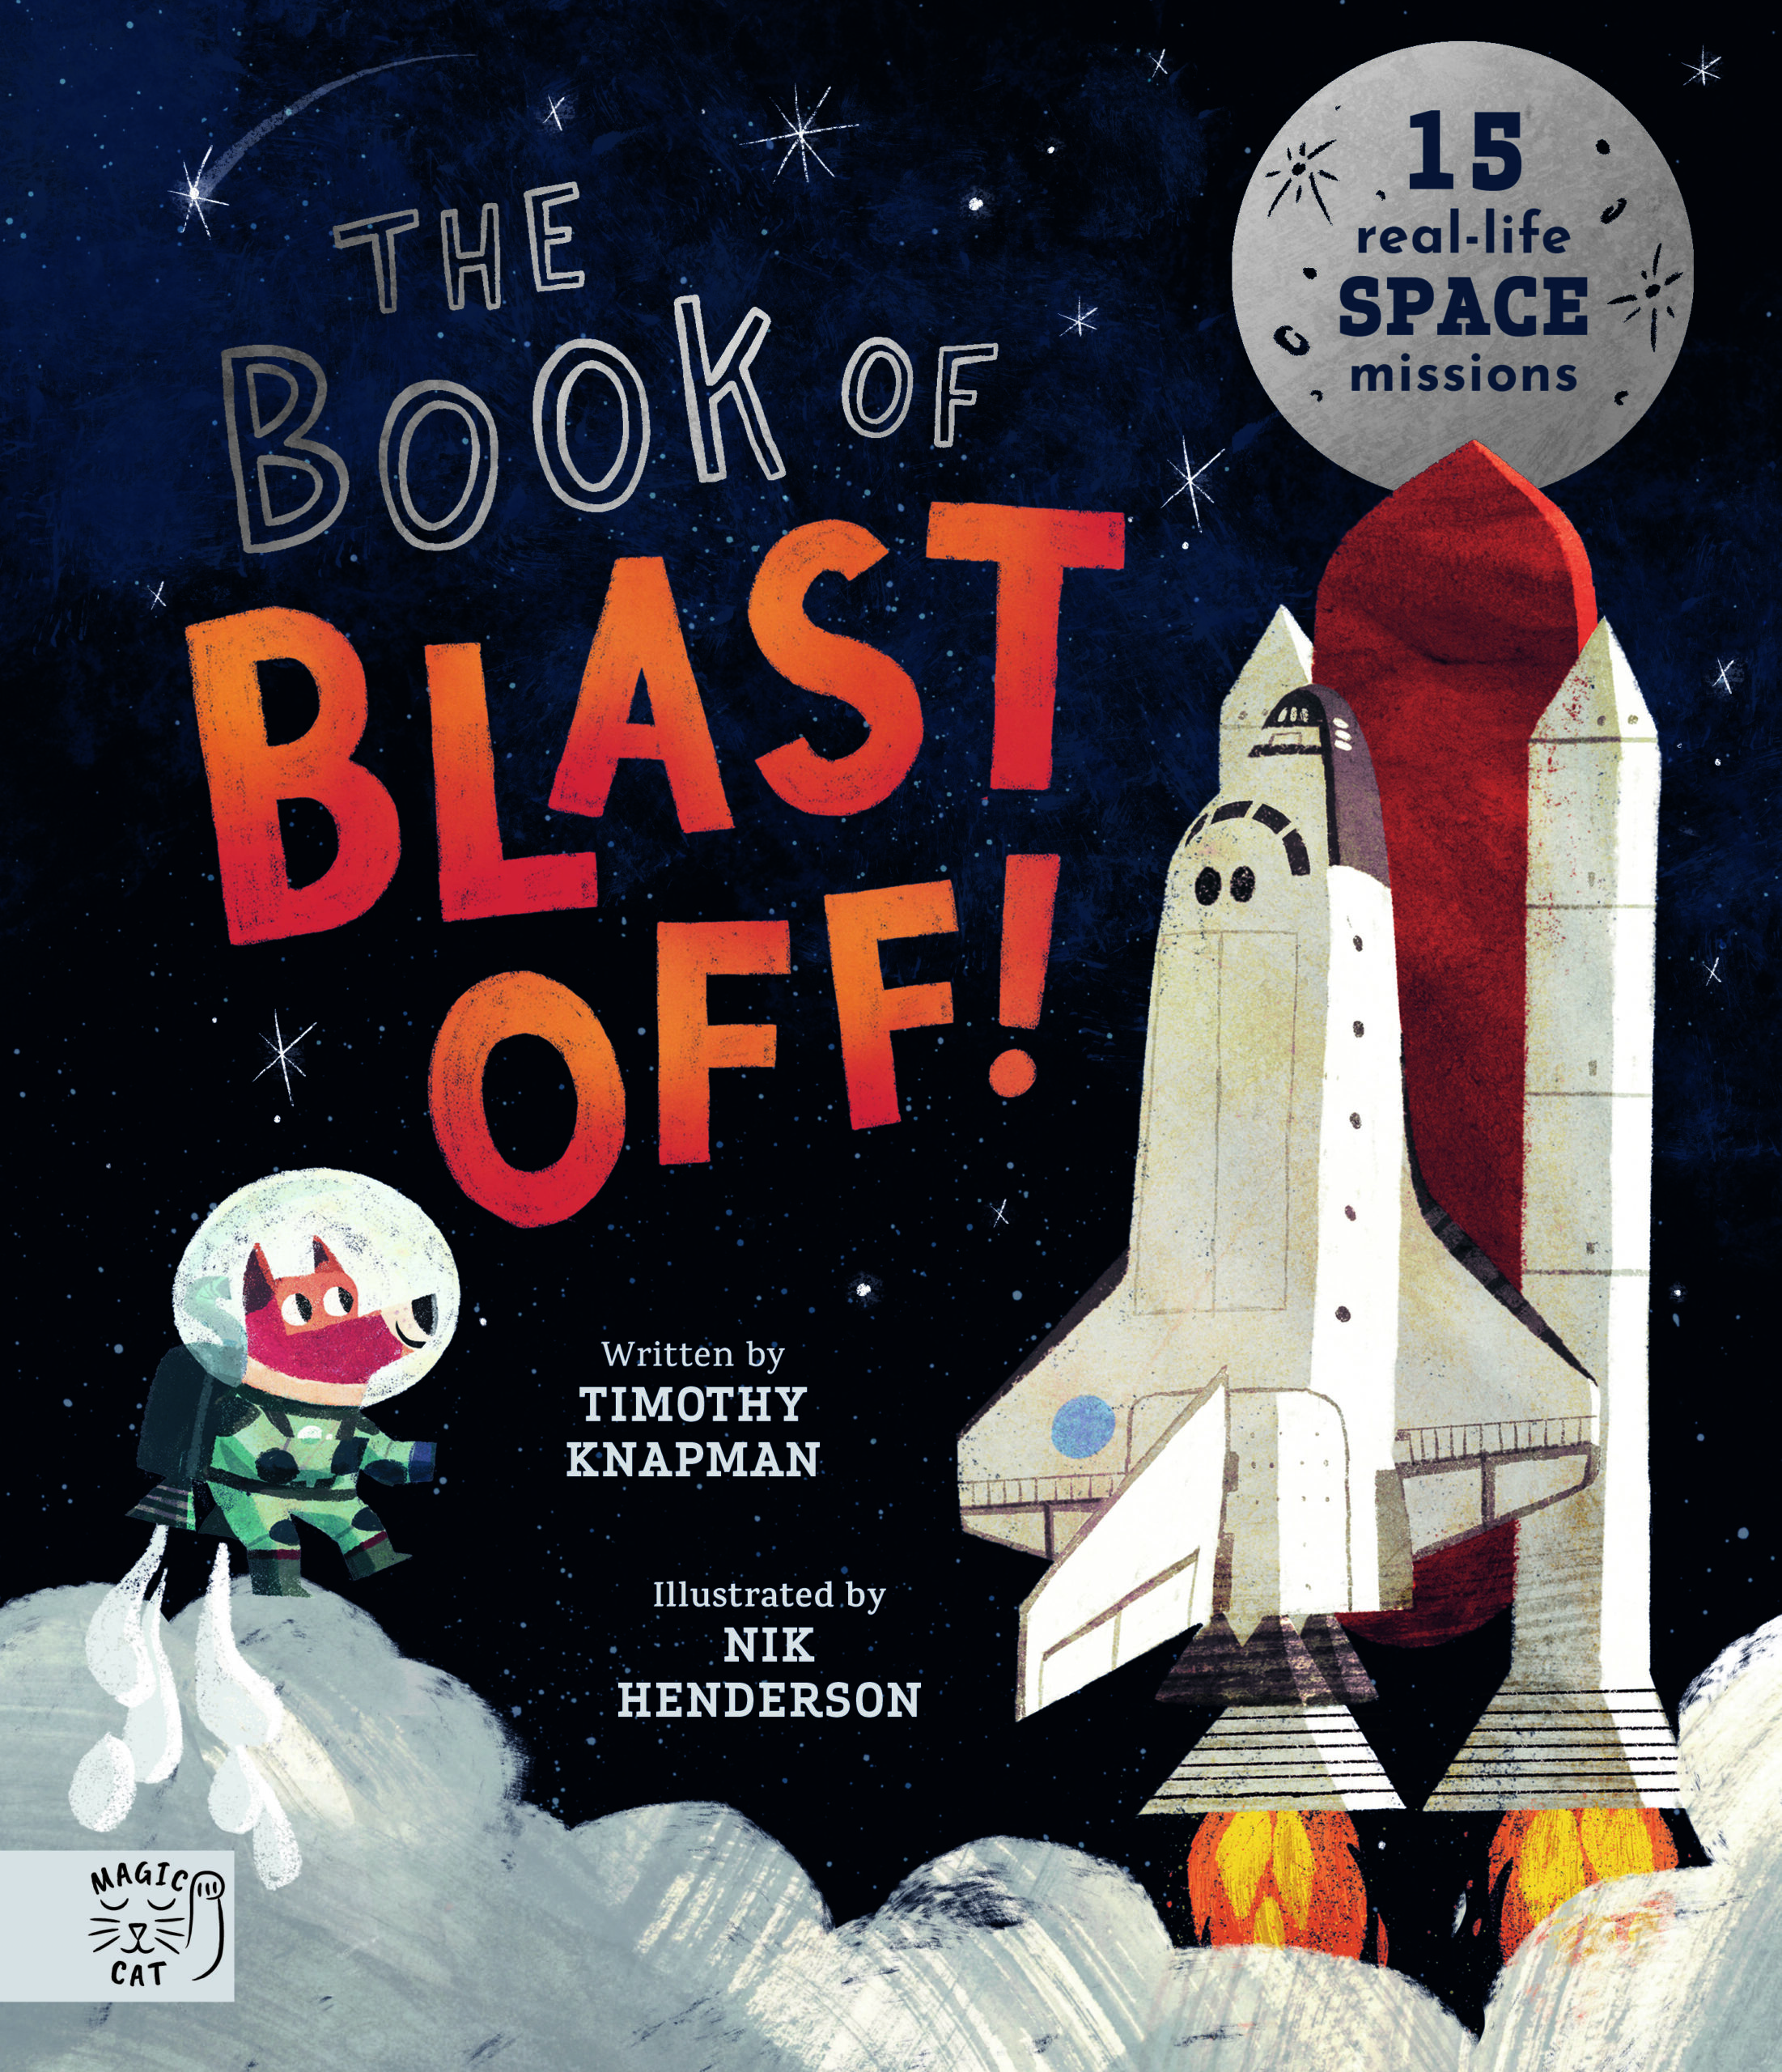 The Book of Blast Off!